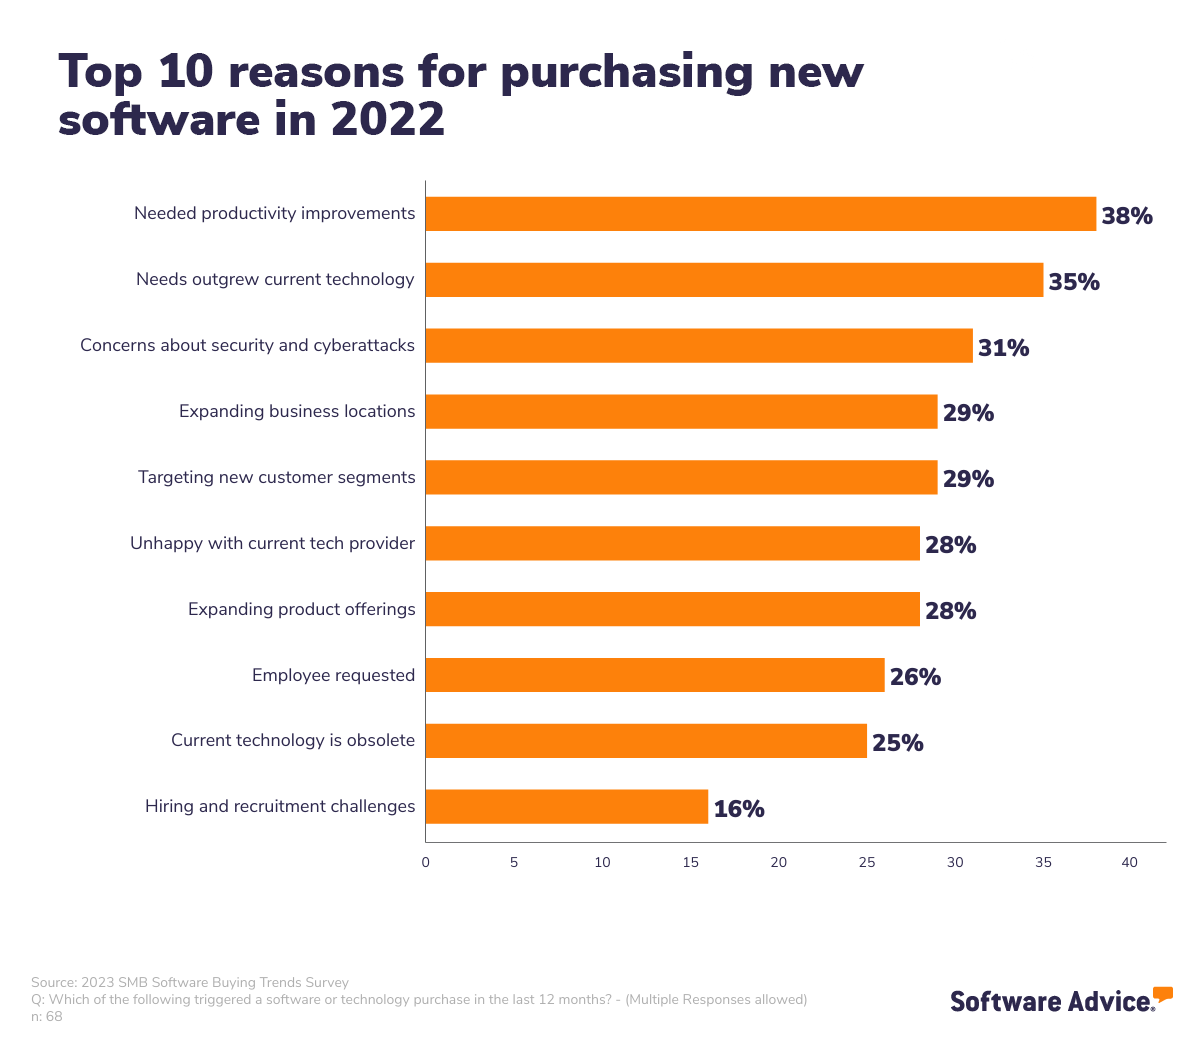 Top reasons for purchasing new software